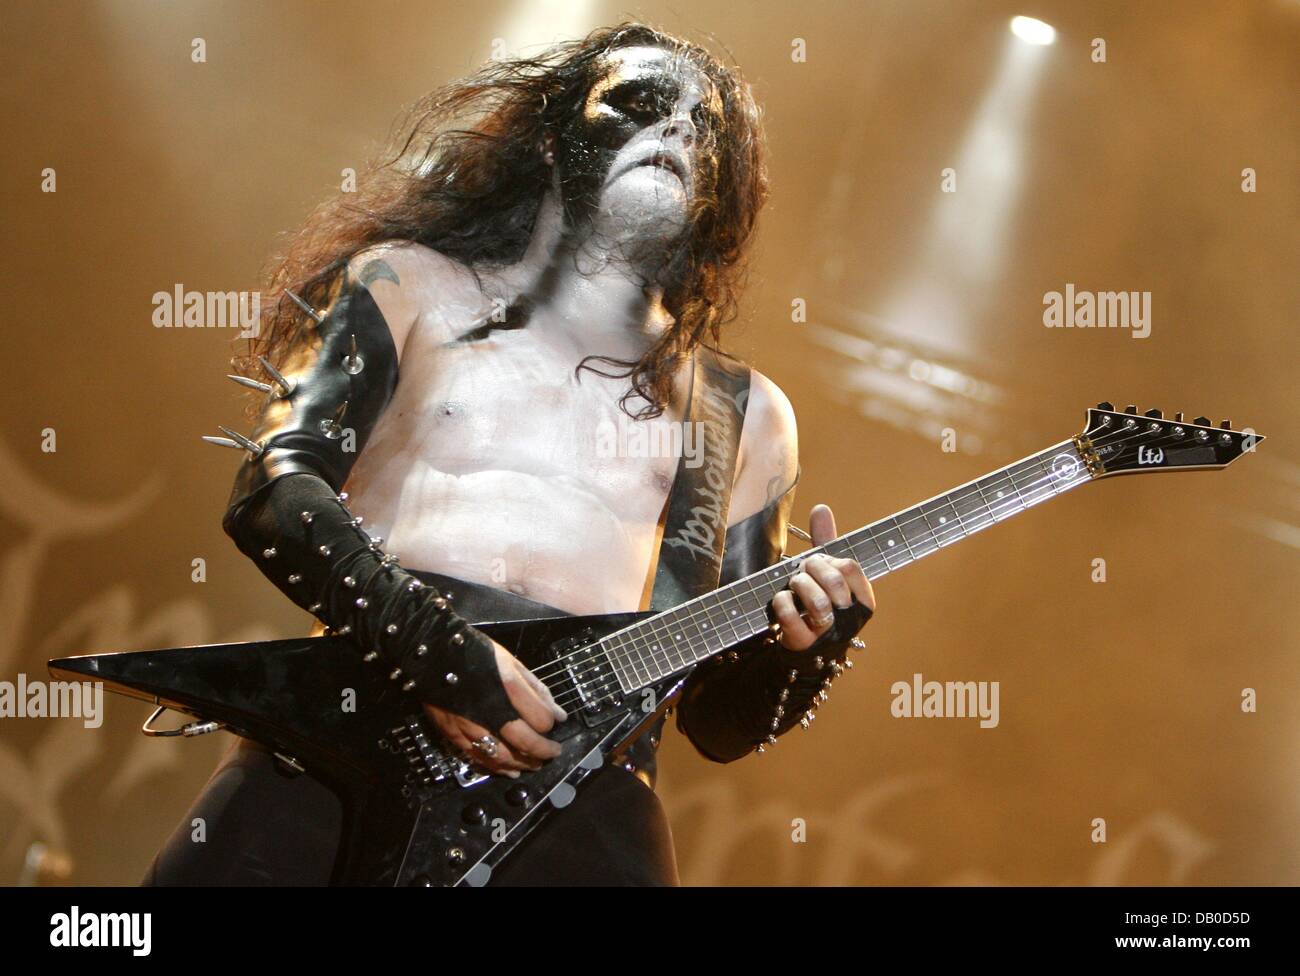 The singer and guitarist of the Norwegian black metal band 'Immortal' Olve 'Abbath' Eikemo is pictured on stage at the Wacken Open Air Festival in Wacken, Germany, 04 August 2007.  Photo: Sebastian Widmann Stock Photo